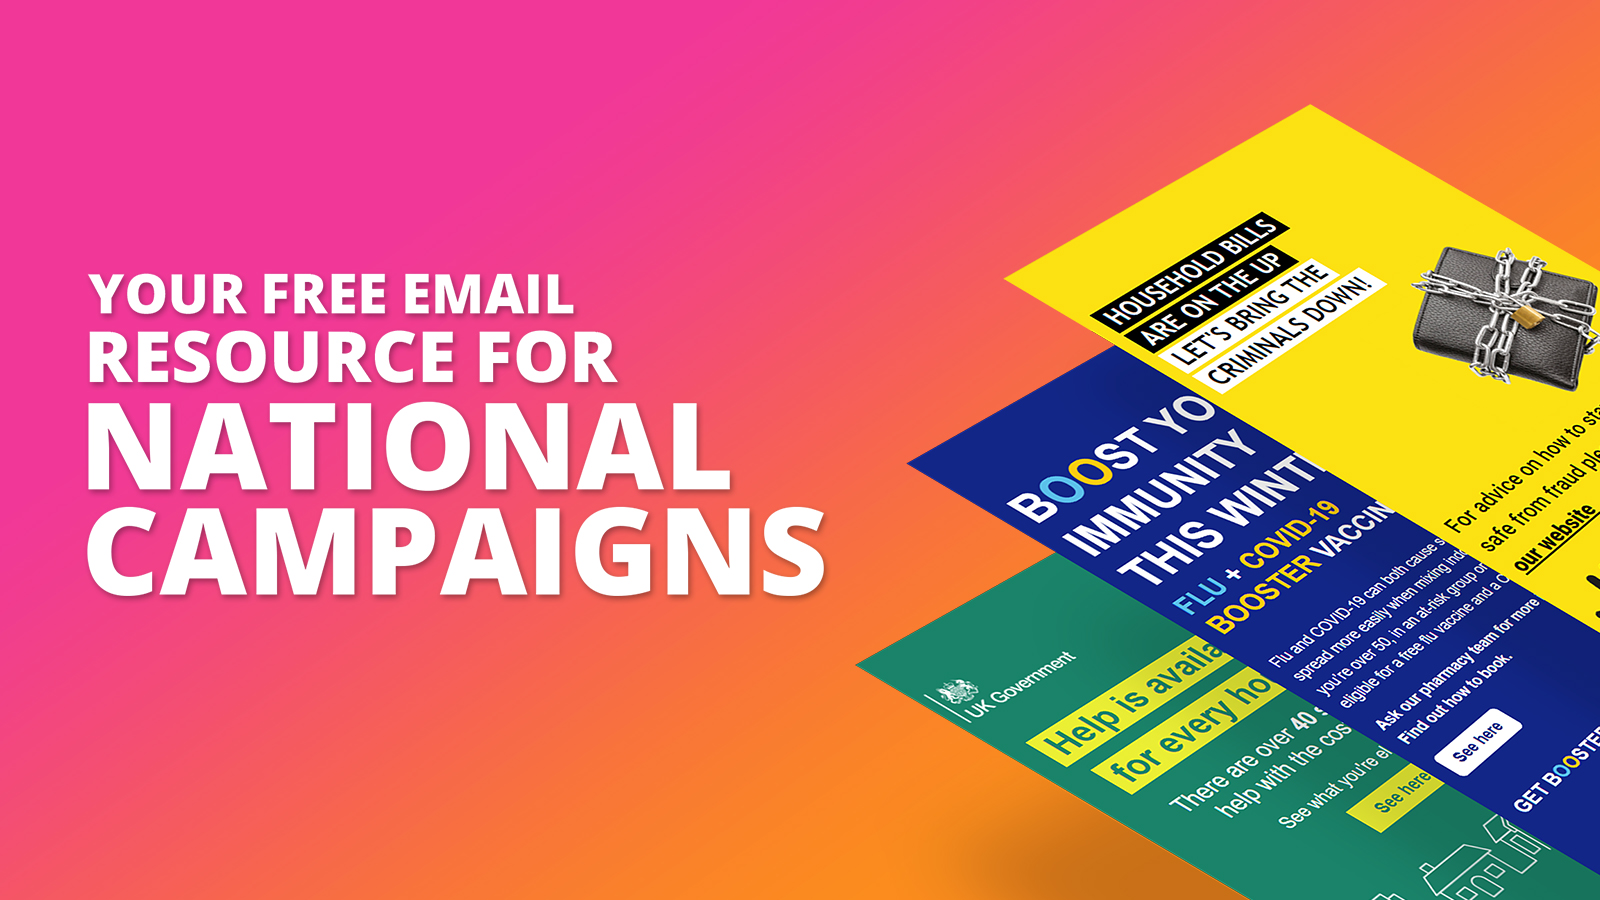 New email library for national campaign toolkits